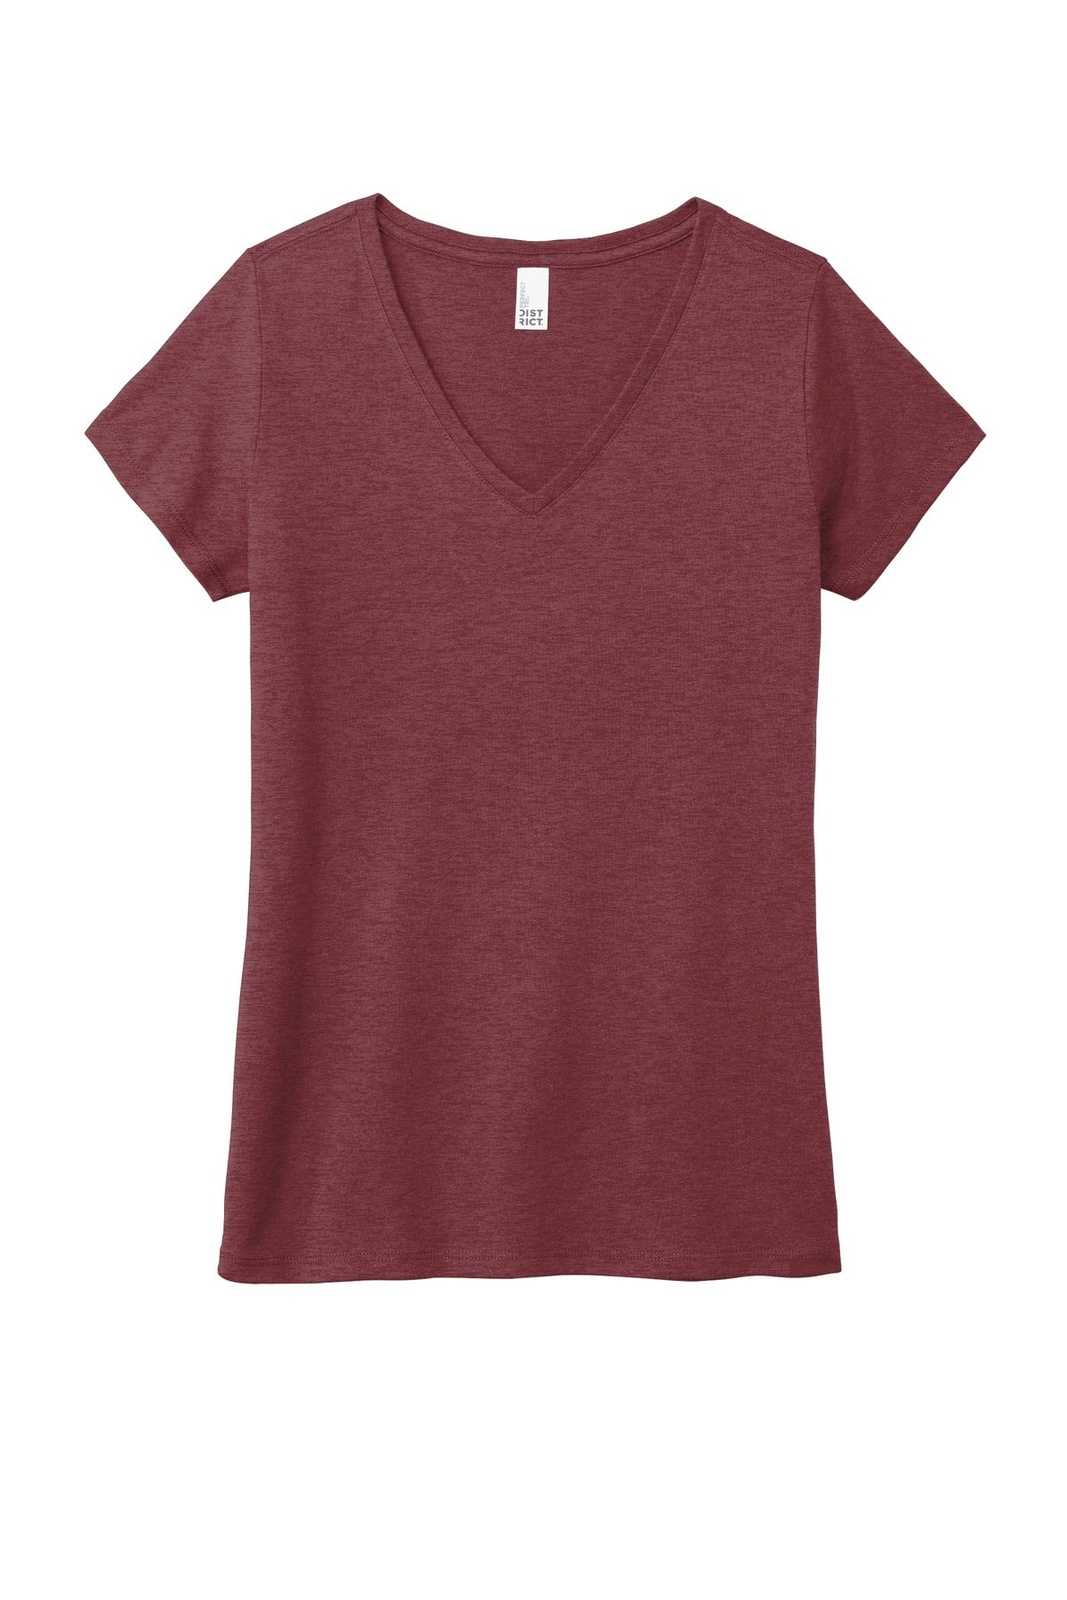 District DM1350L Women's Perfect Tri V-Neck Tee - Maroon Frost - HIT a Double - 1